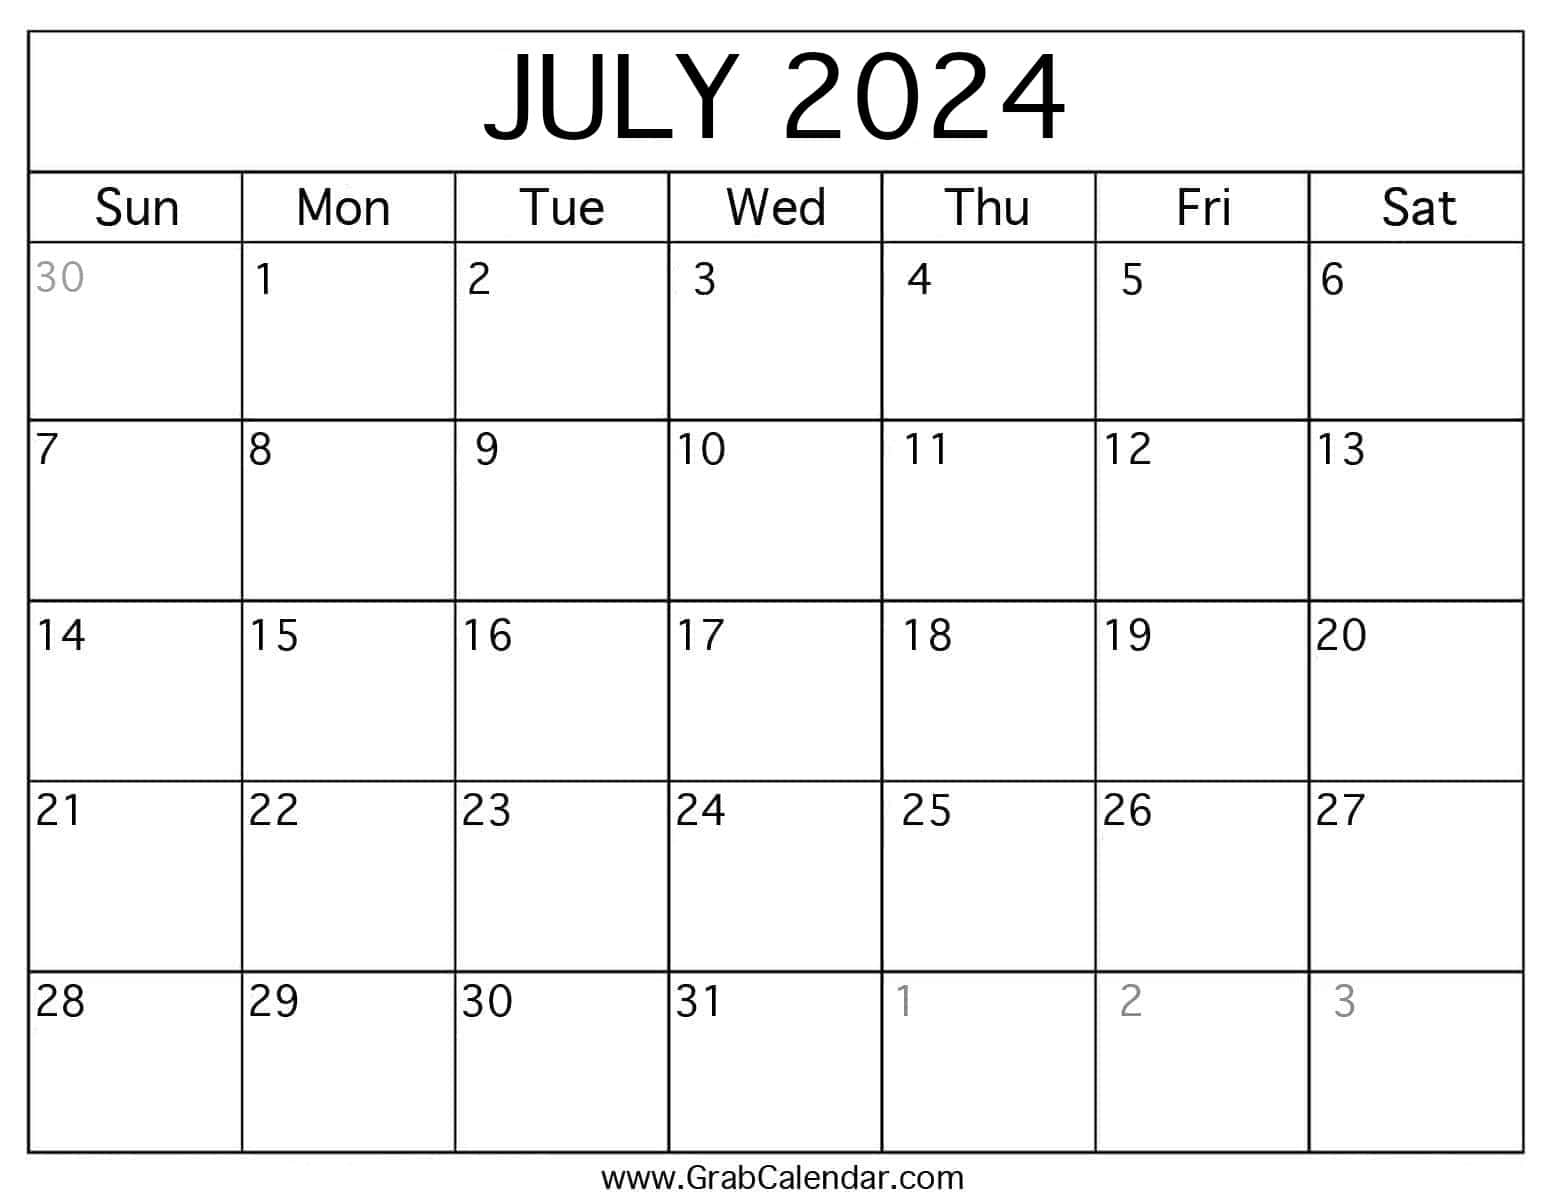 Printable July 2024 Calendar | Give Me The Calendar For The Month Of July 2024